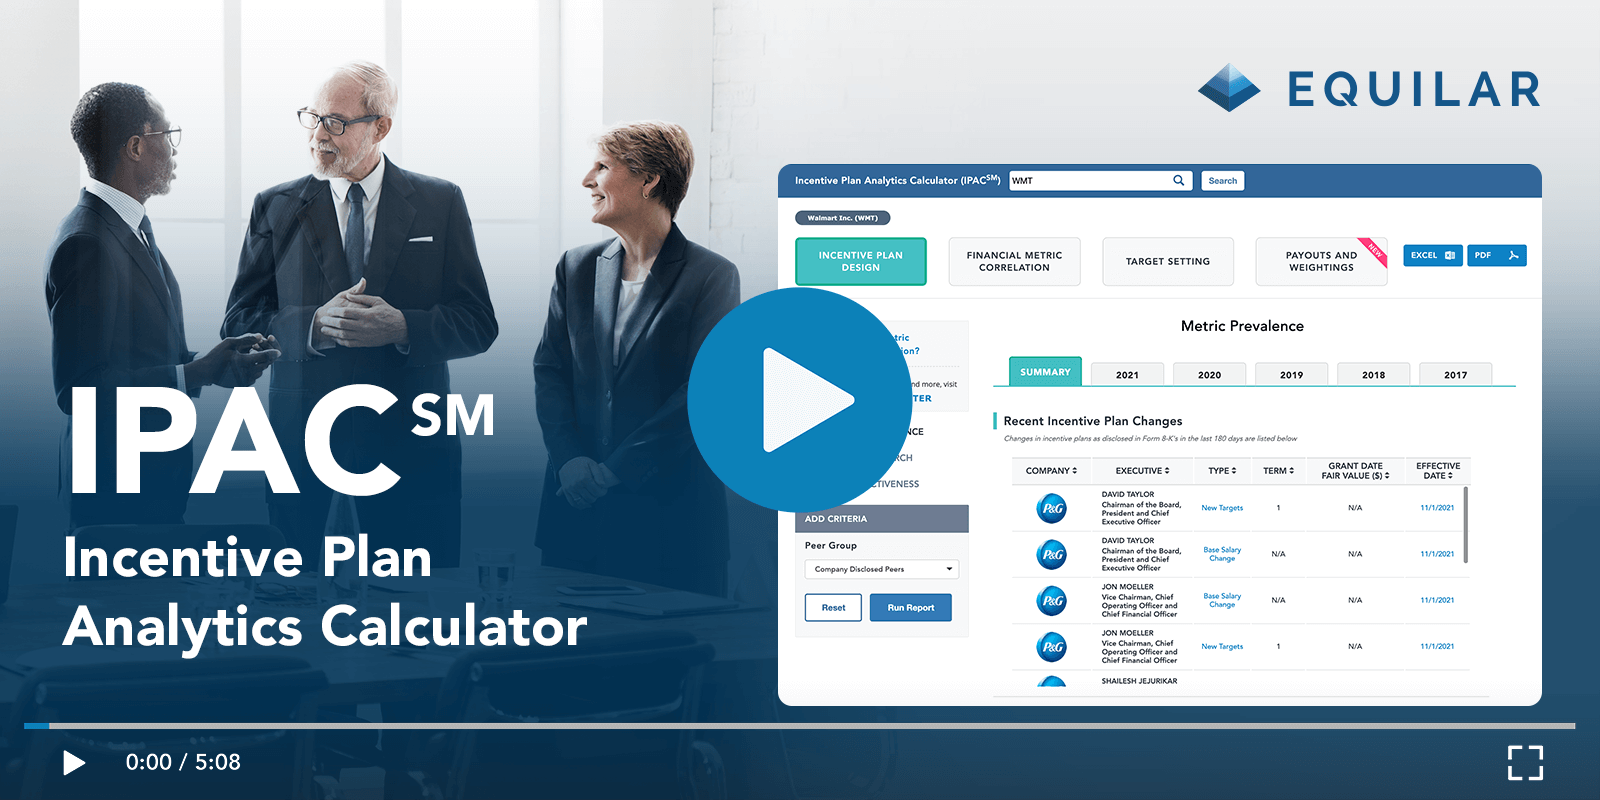 Demonstration Video for the Equilar Incentive Plan Analytics Calculator